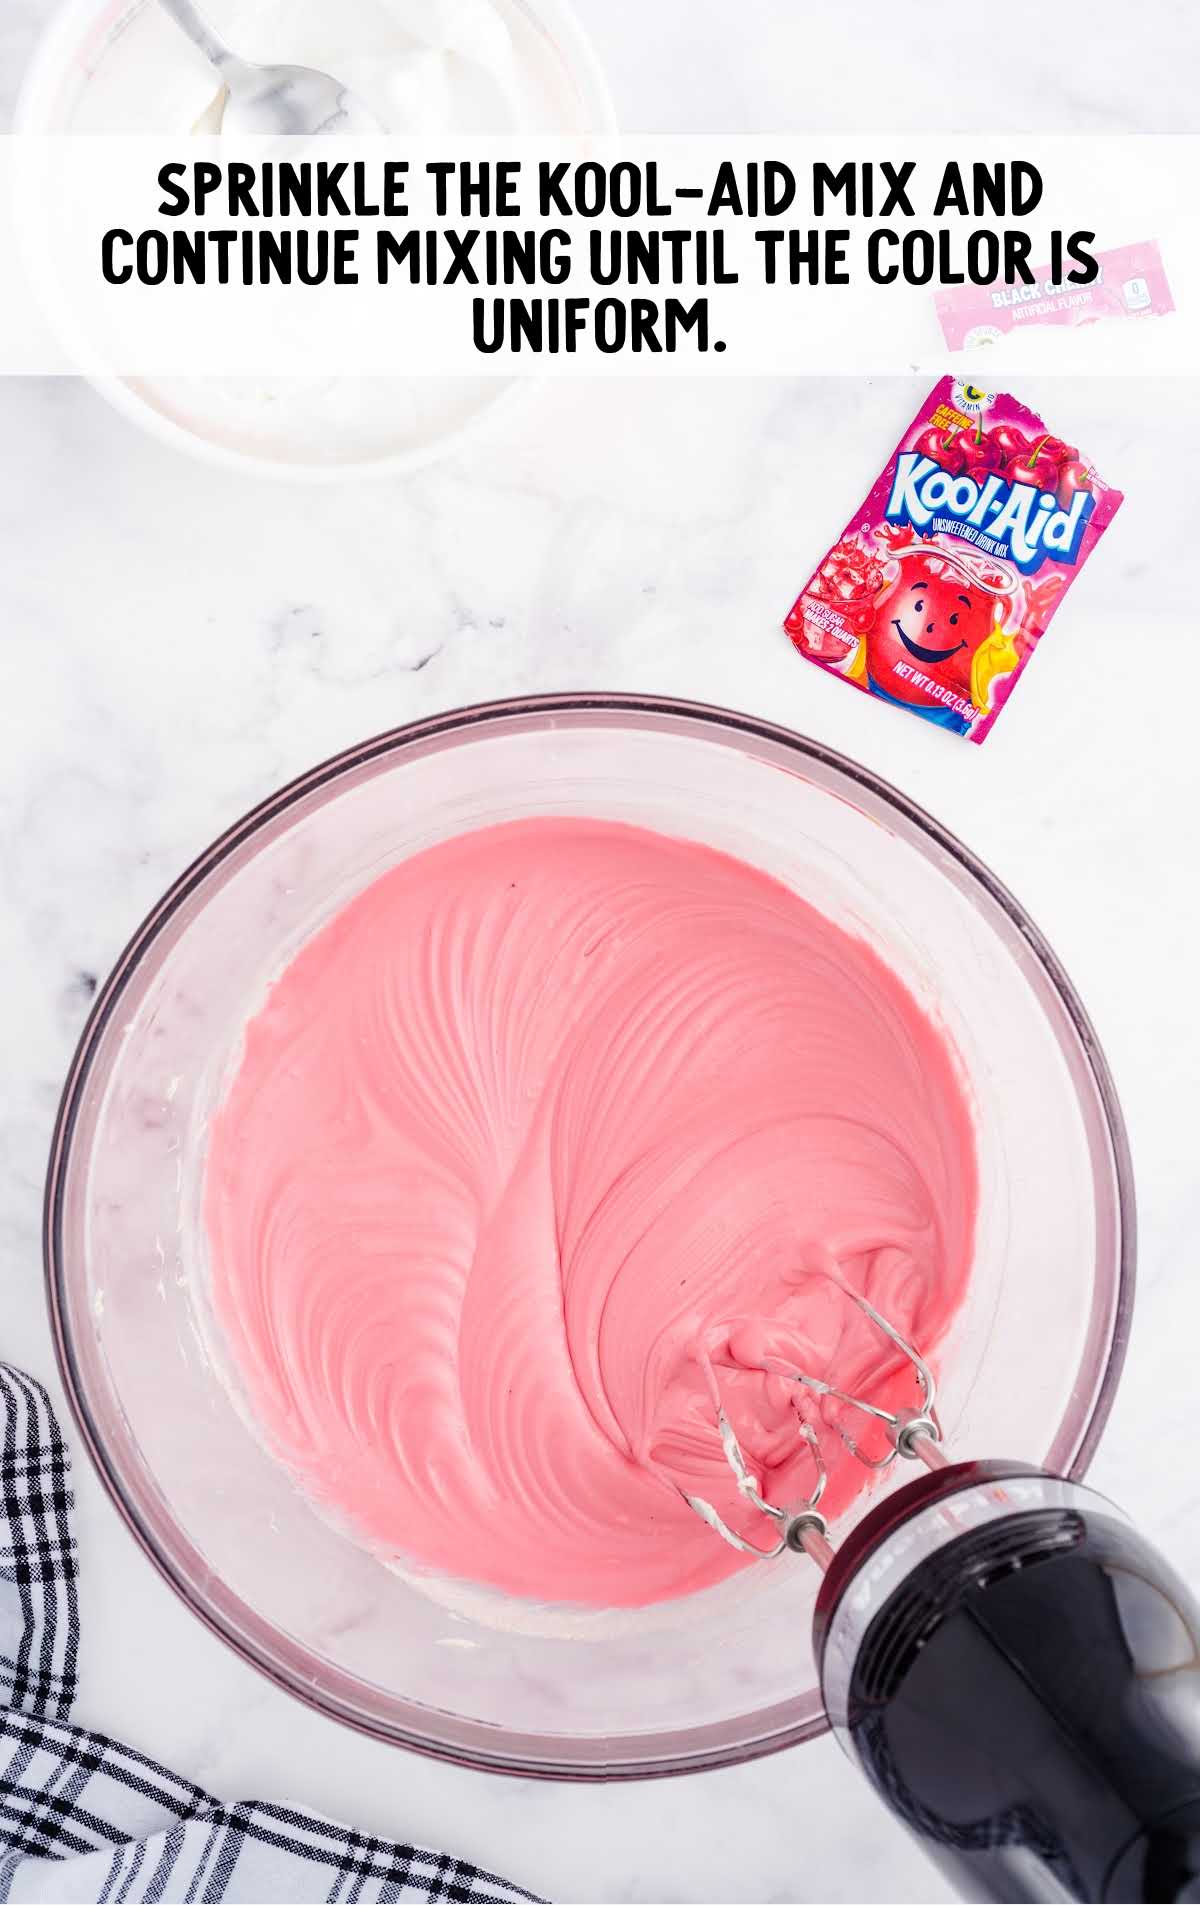 kool-aid blended into the cream cheese mixture in a bowl